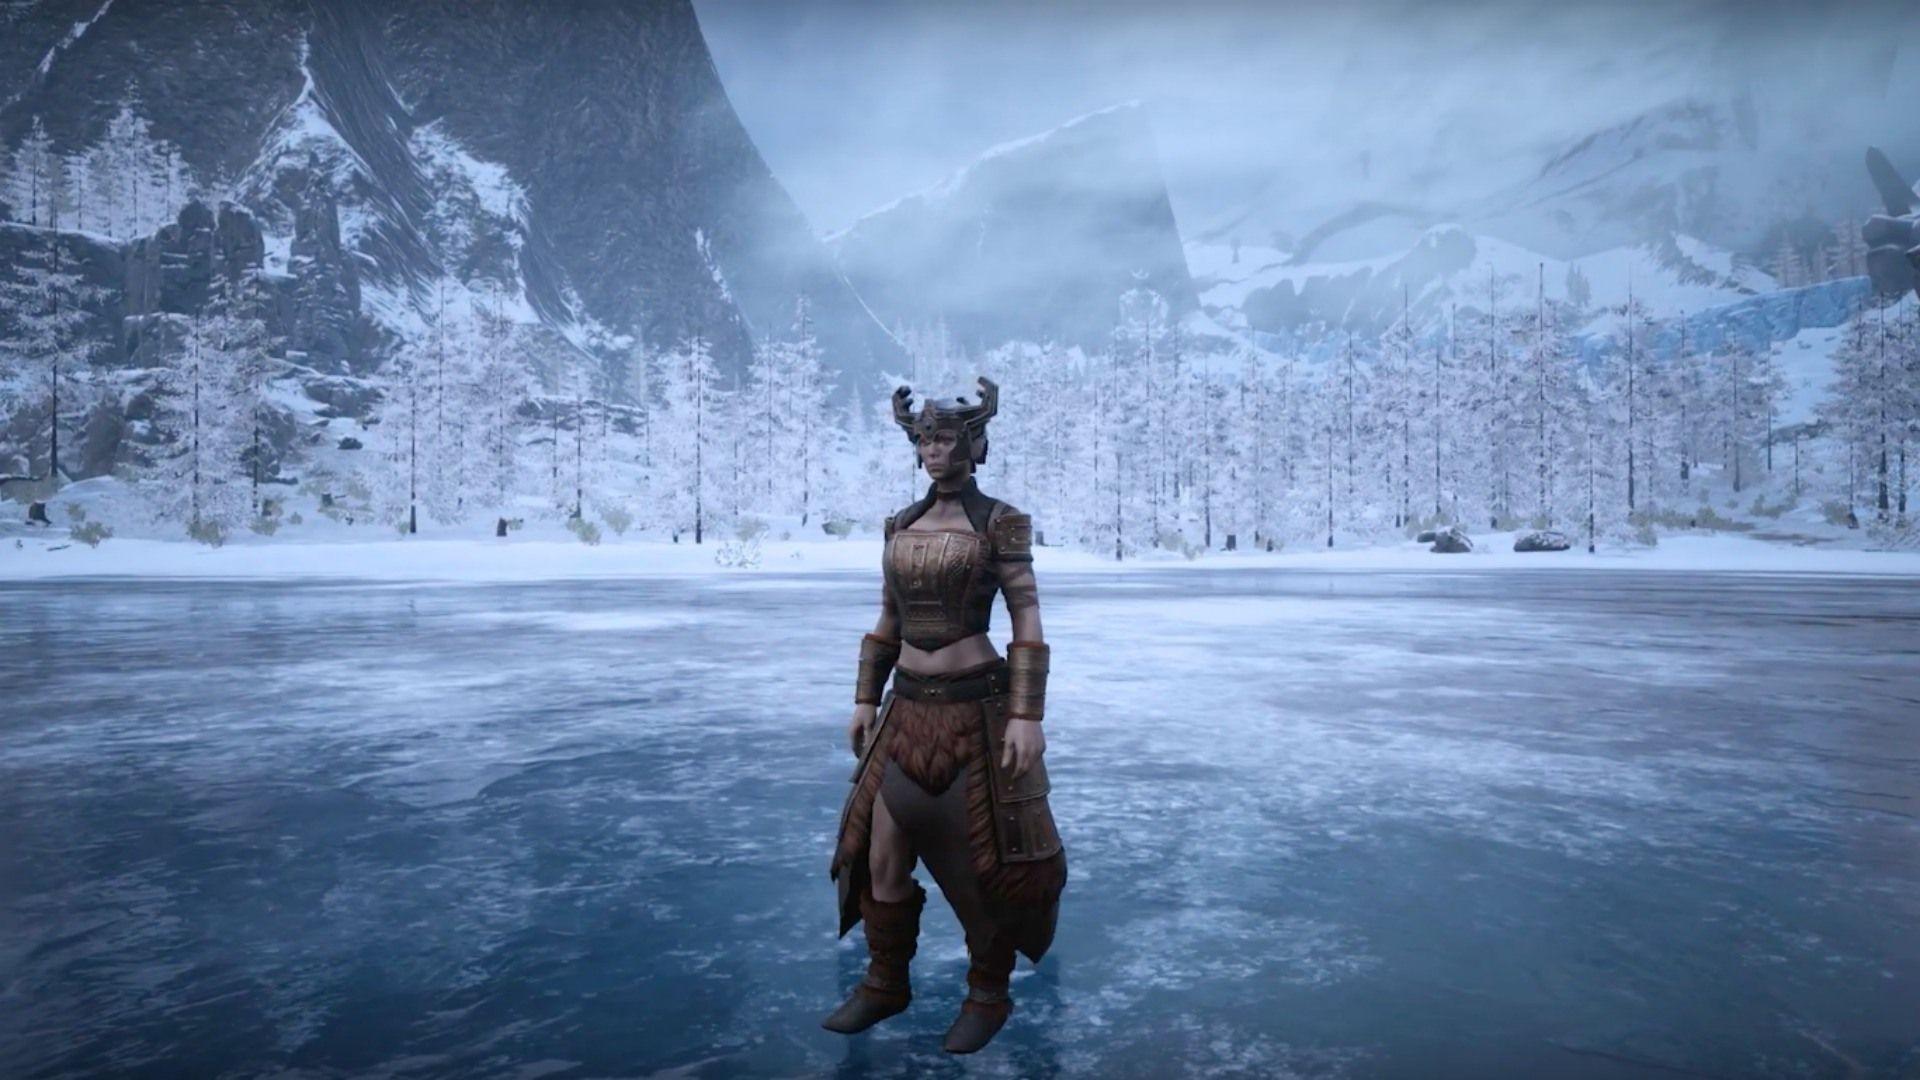 Conan Exiles Official The Frozen North Free Expansion Update